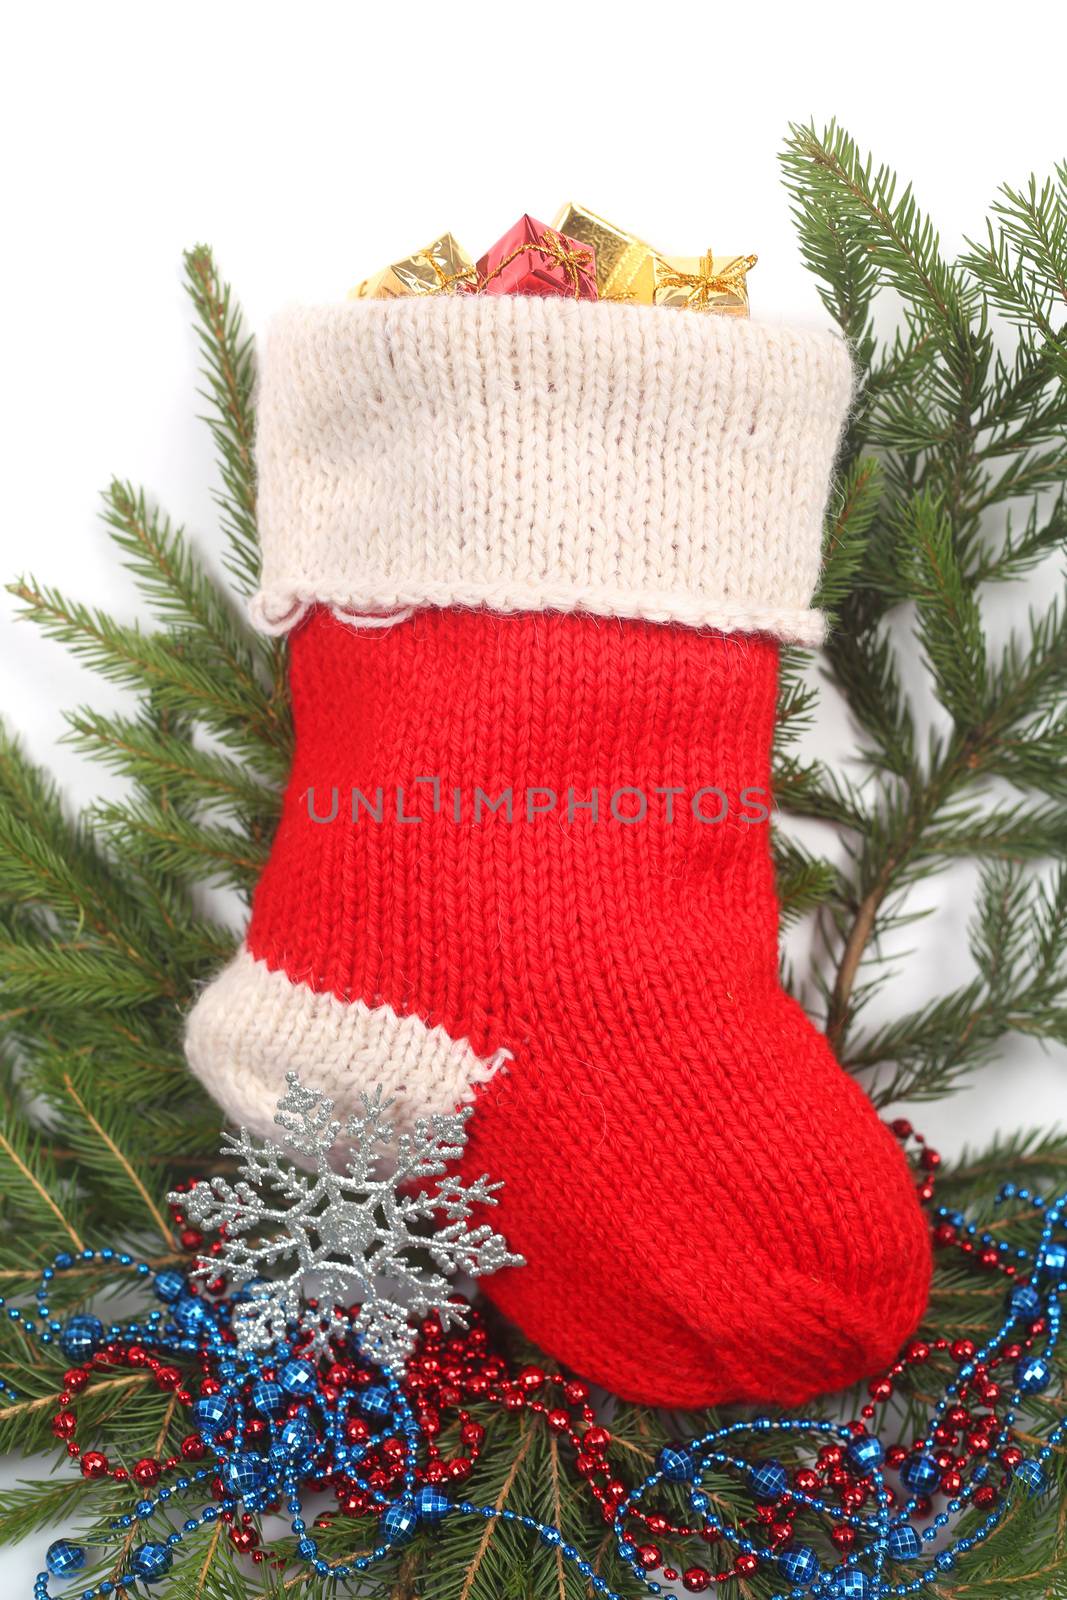 Red Christmas sock with gifts isolated on white background